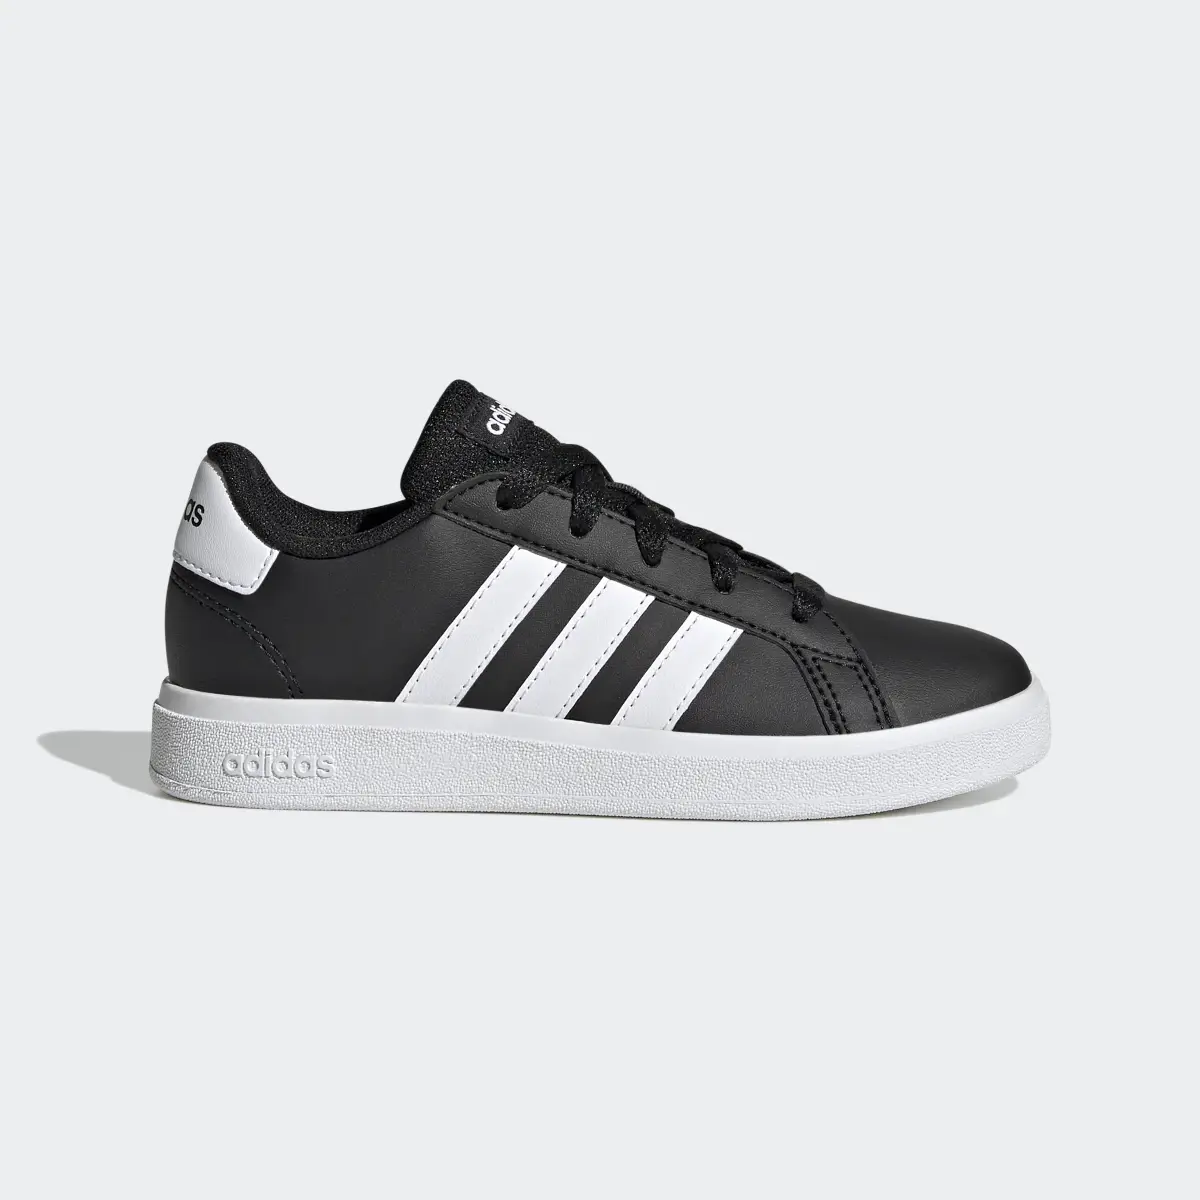 Adidas Grand Court Lace-Up Shoes. 2